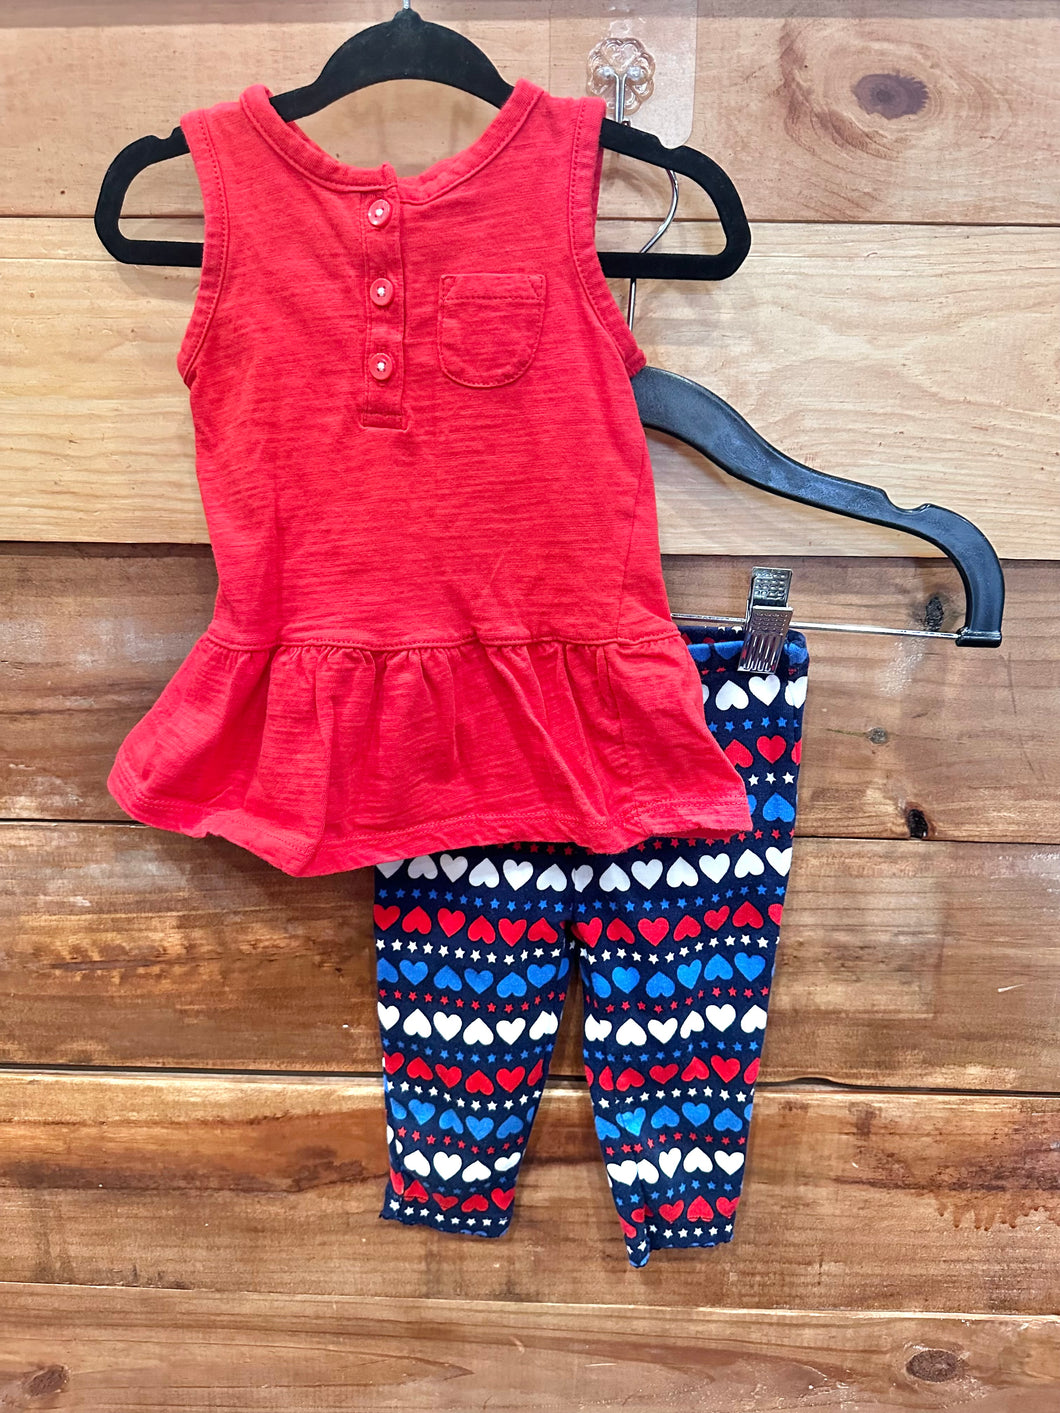 Carters Red & Blue Heart 2pc Outfit Size 6m